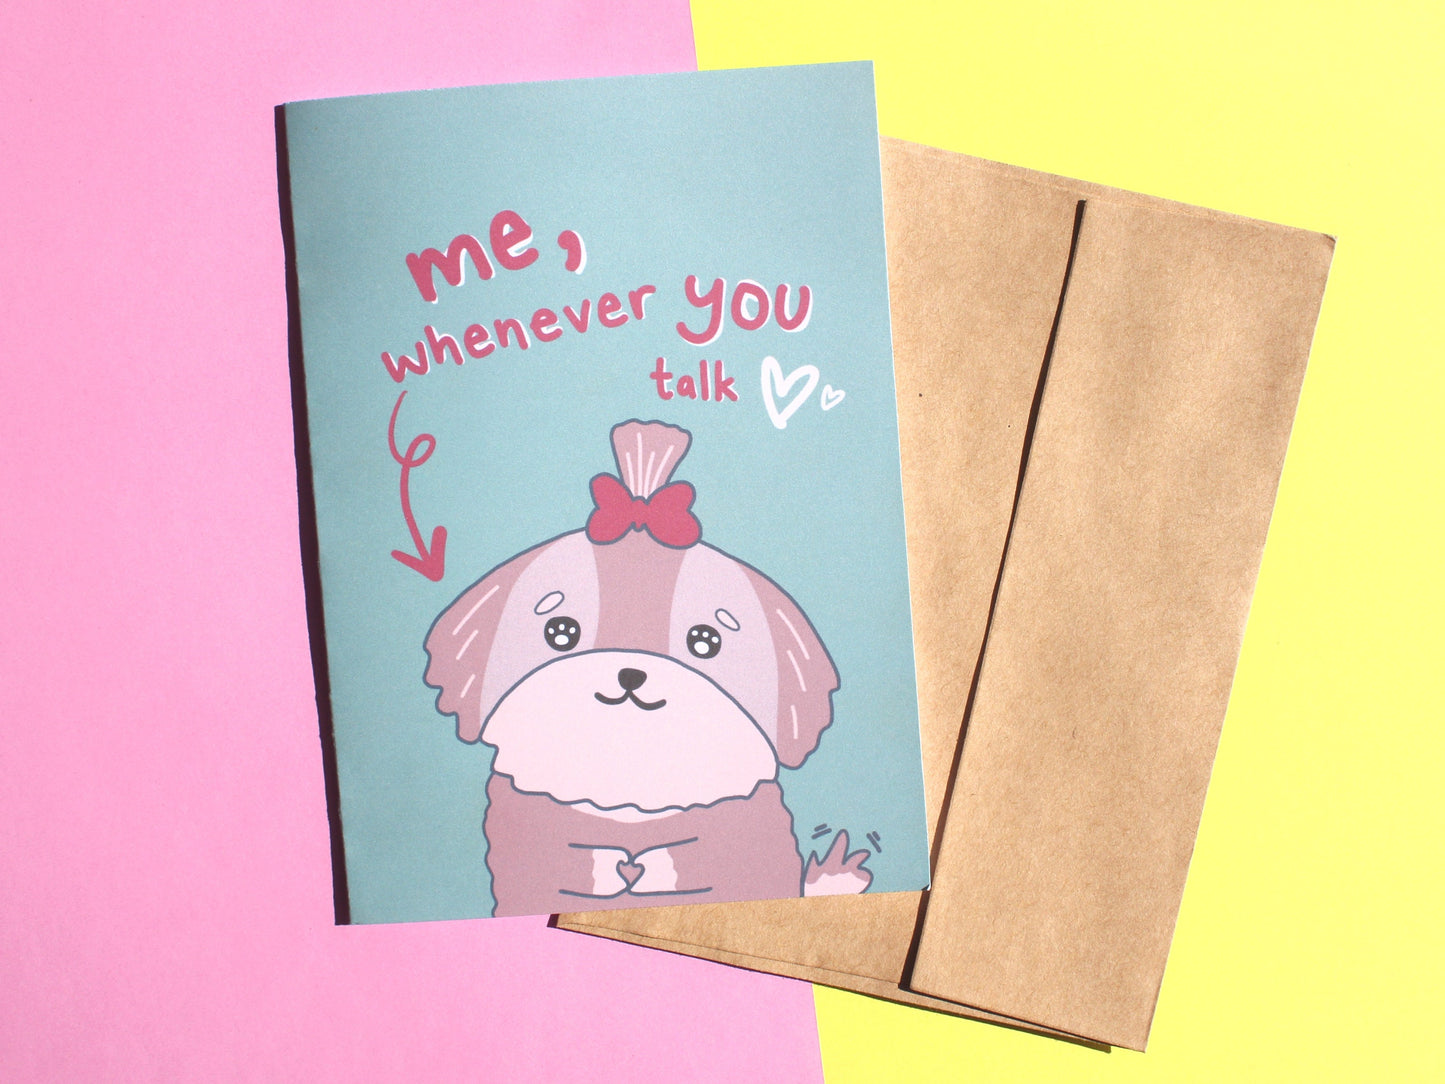 Me, Whenever You Talk Card | Funny Card | Card for Boyfriend | Card for Him